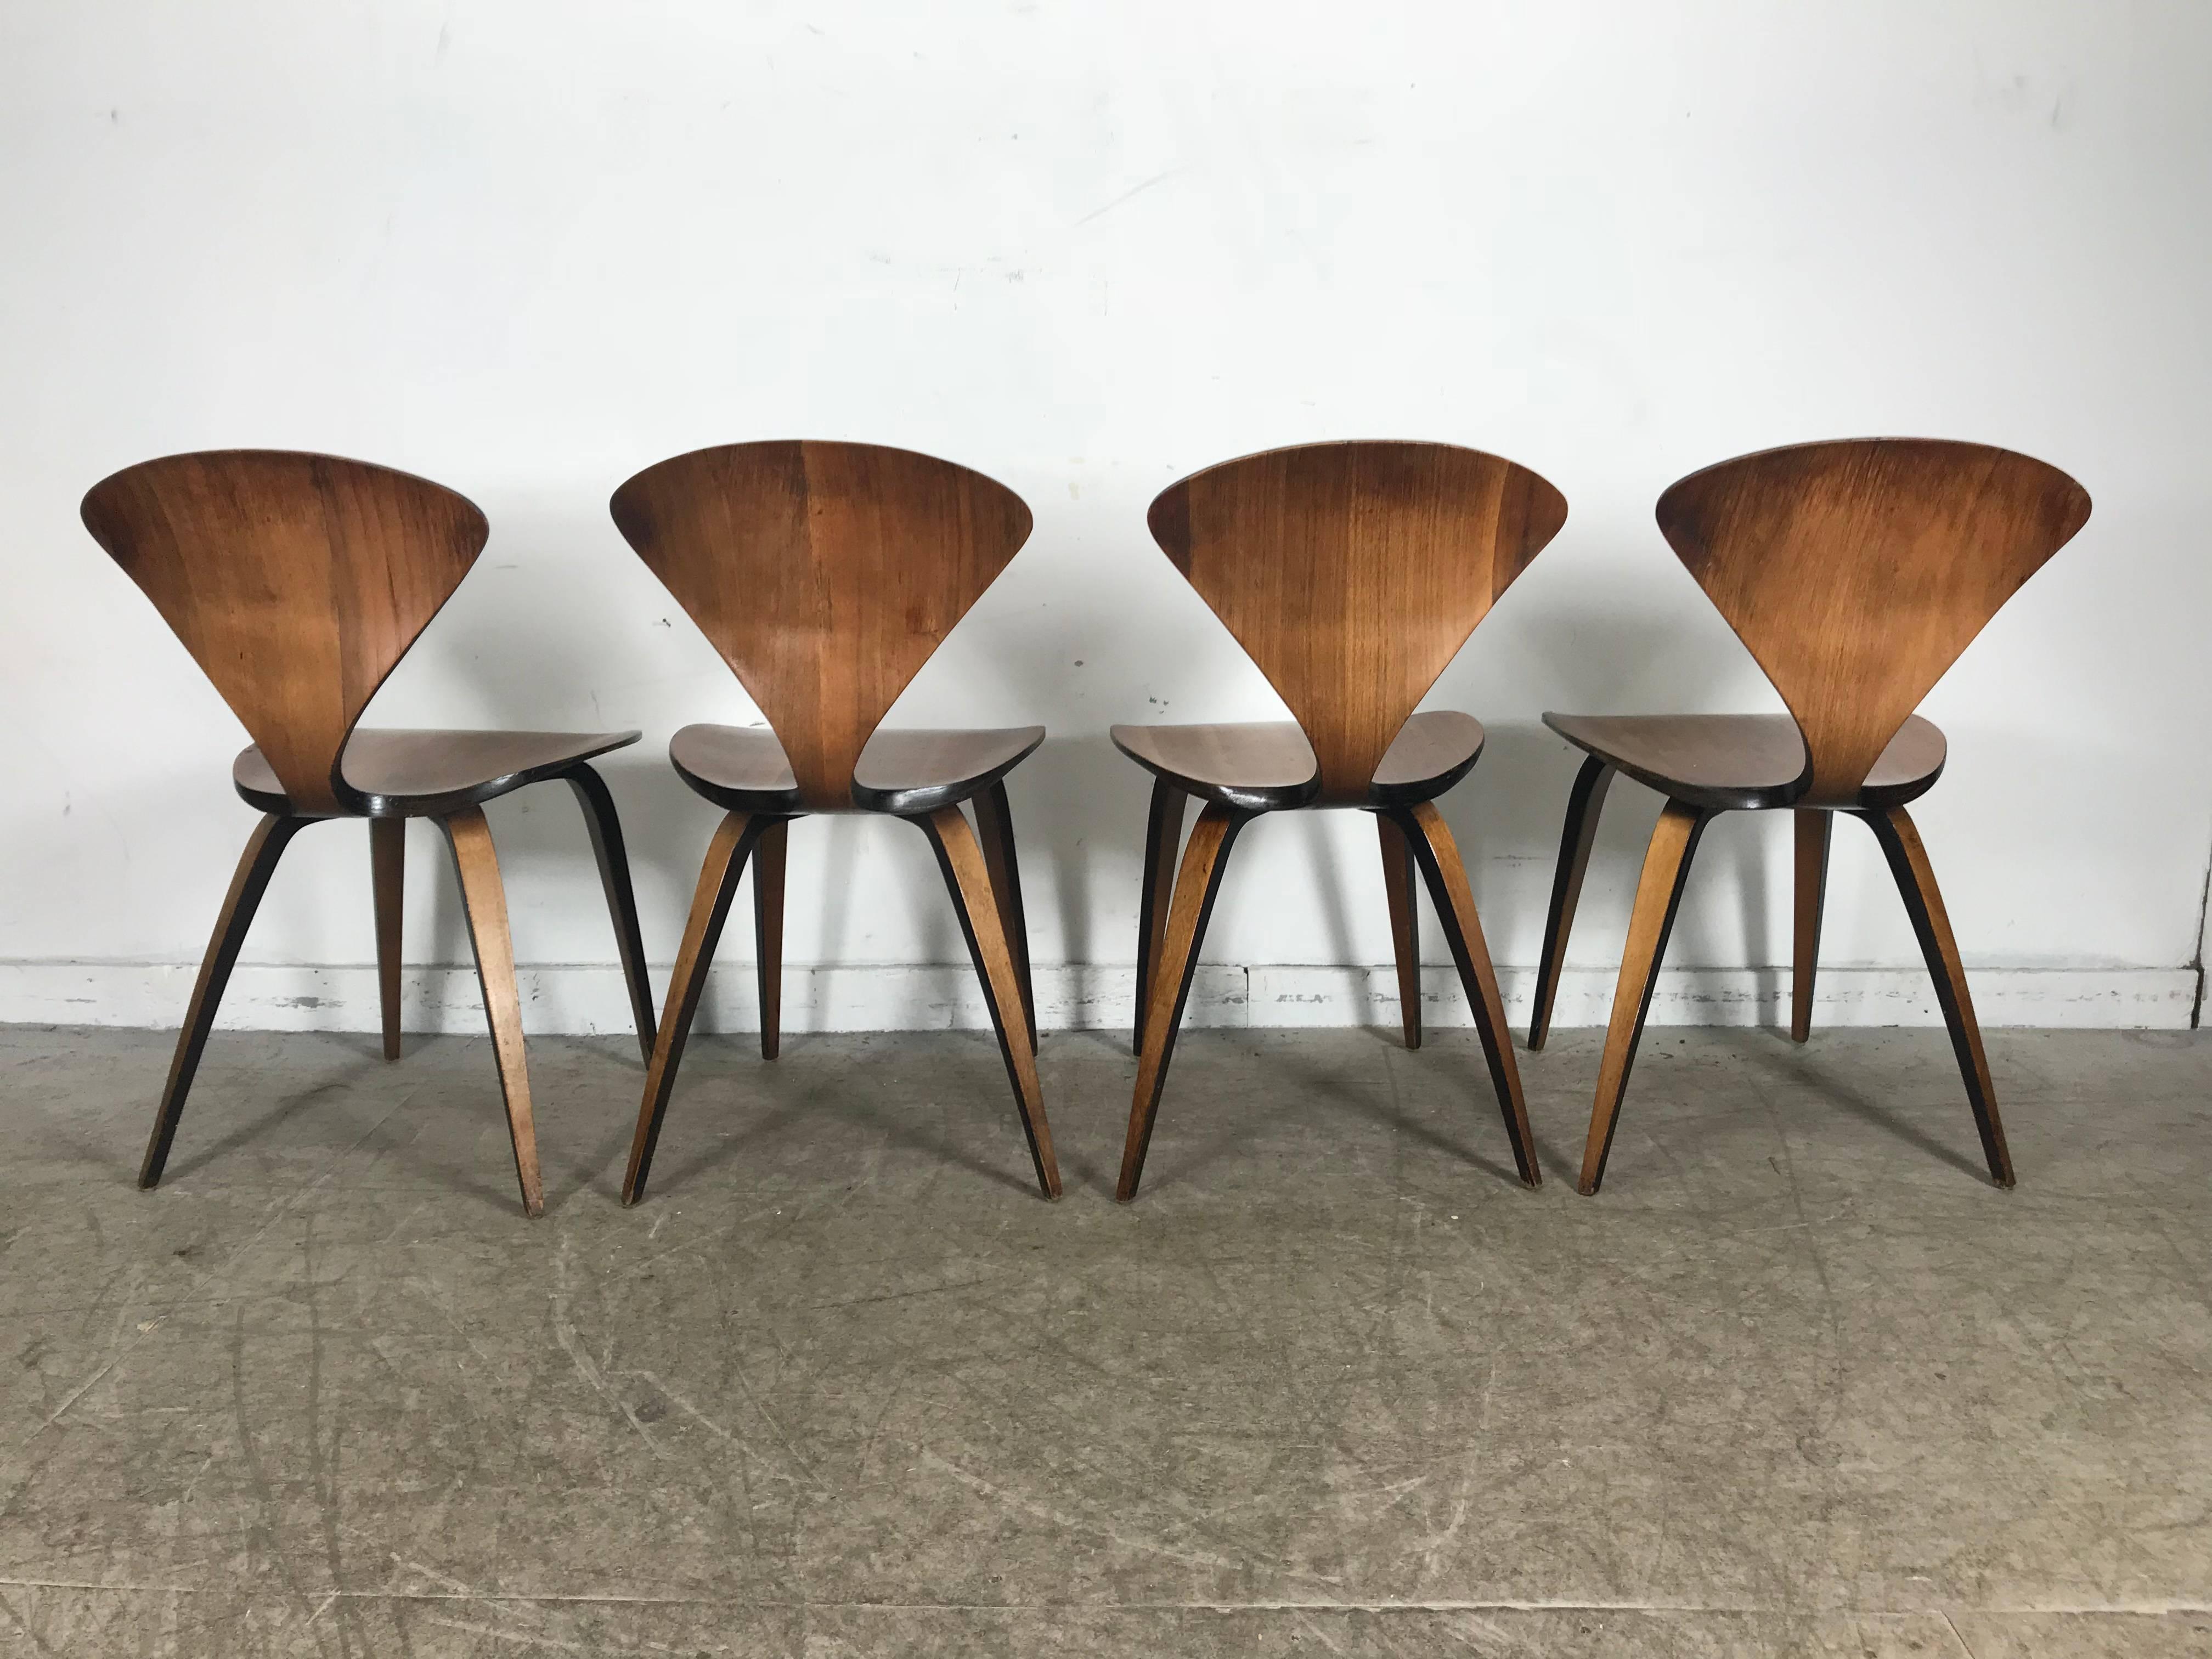 American Set of Four Classic Modern Plywood Side Chairs by Norman Cherner for Plycraft